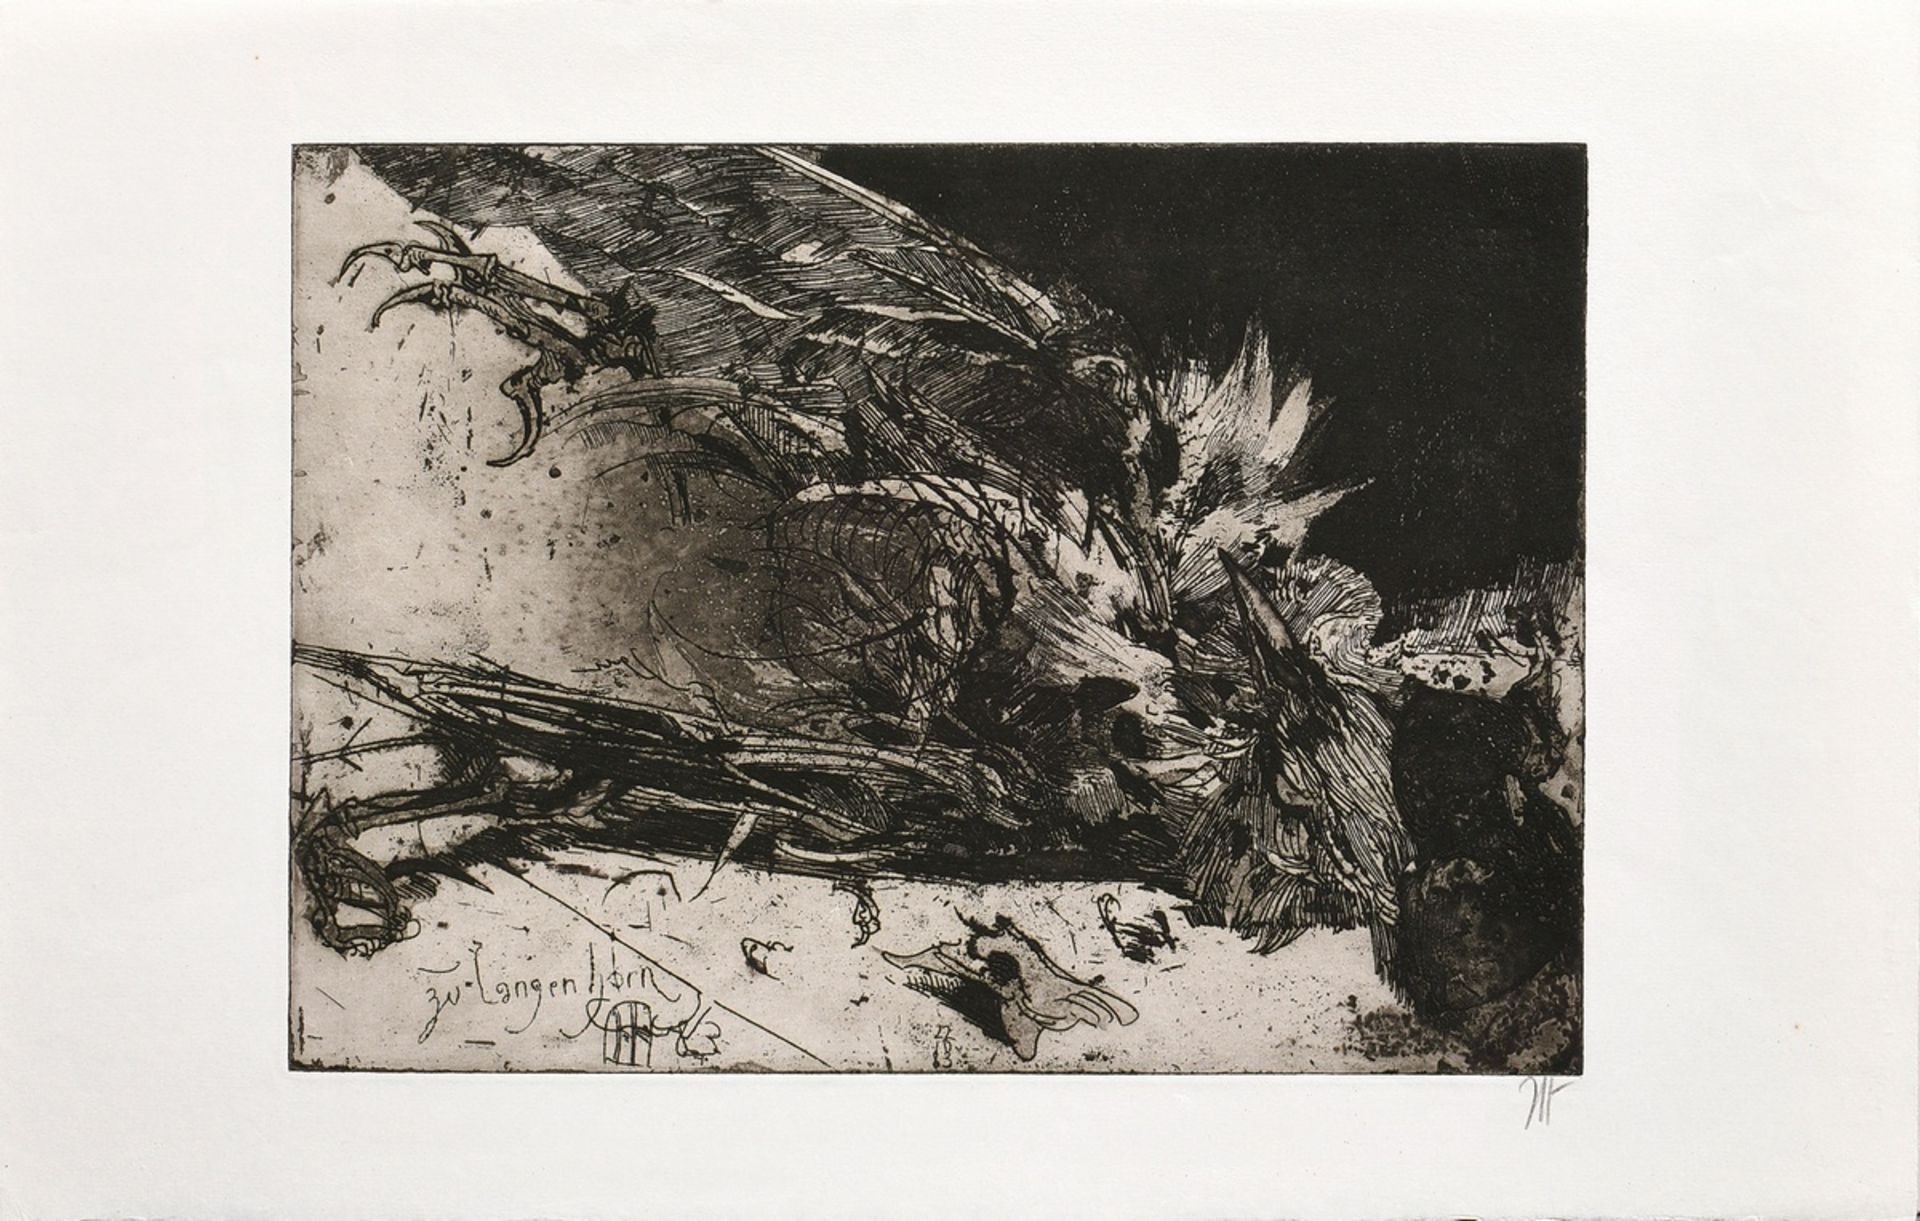 Janssen, Horst (1929-1995) "Crow" 1983, etching, Griffelkunst, sign. lower right, sign./dat./inscr. - Image 2 of 3